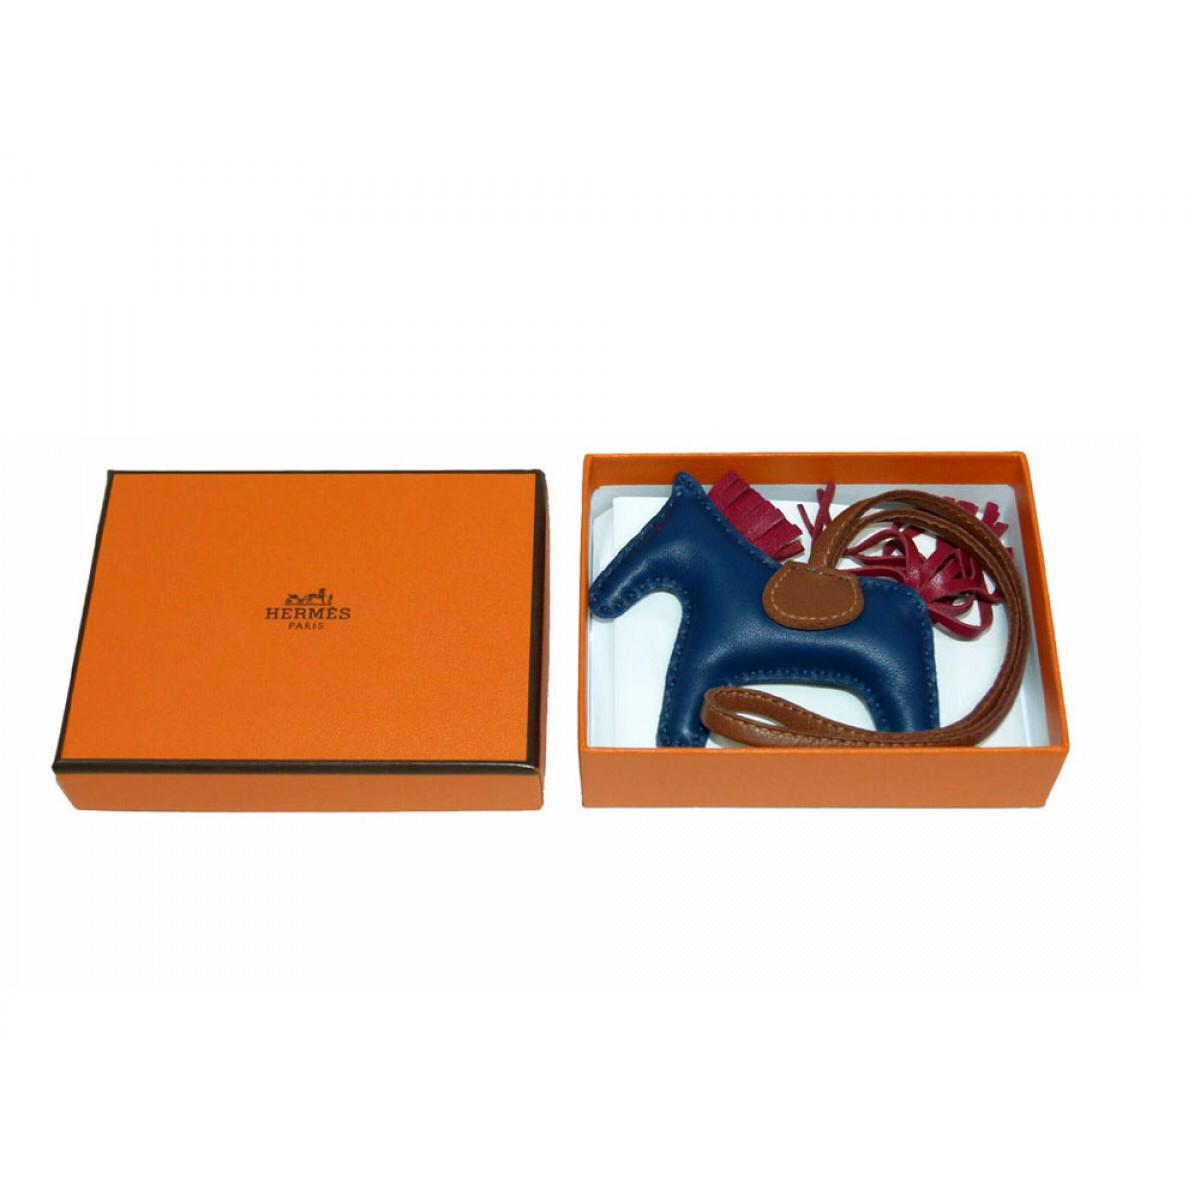 Authentic hermes rodeo charm - Gem